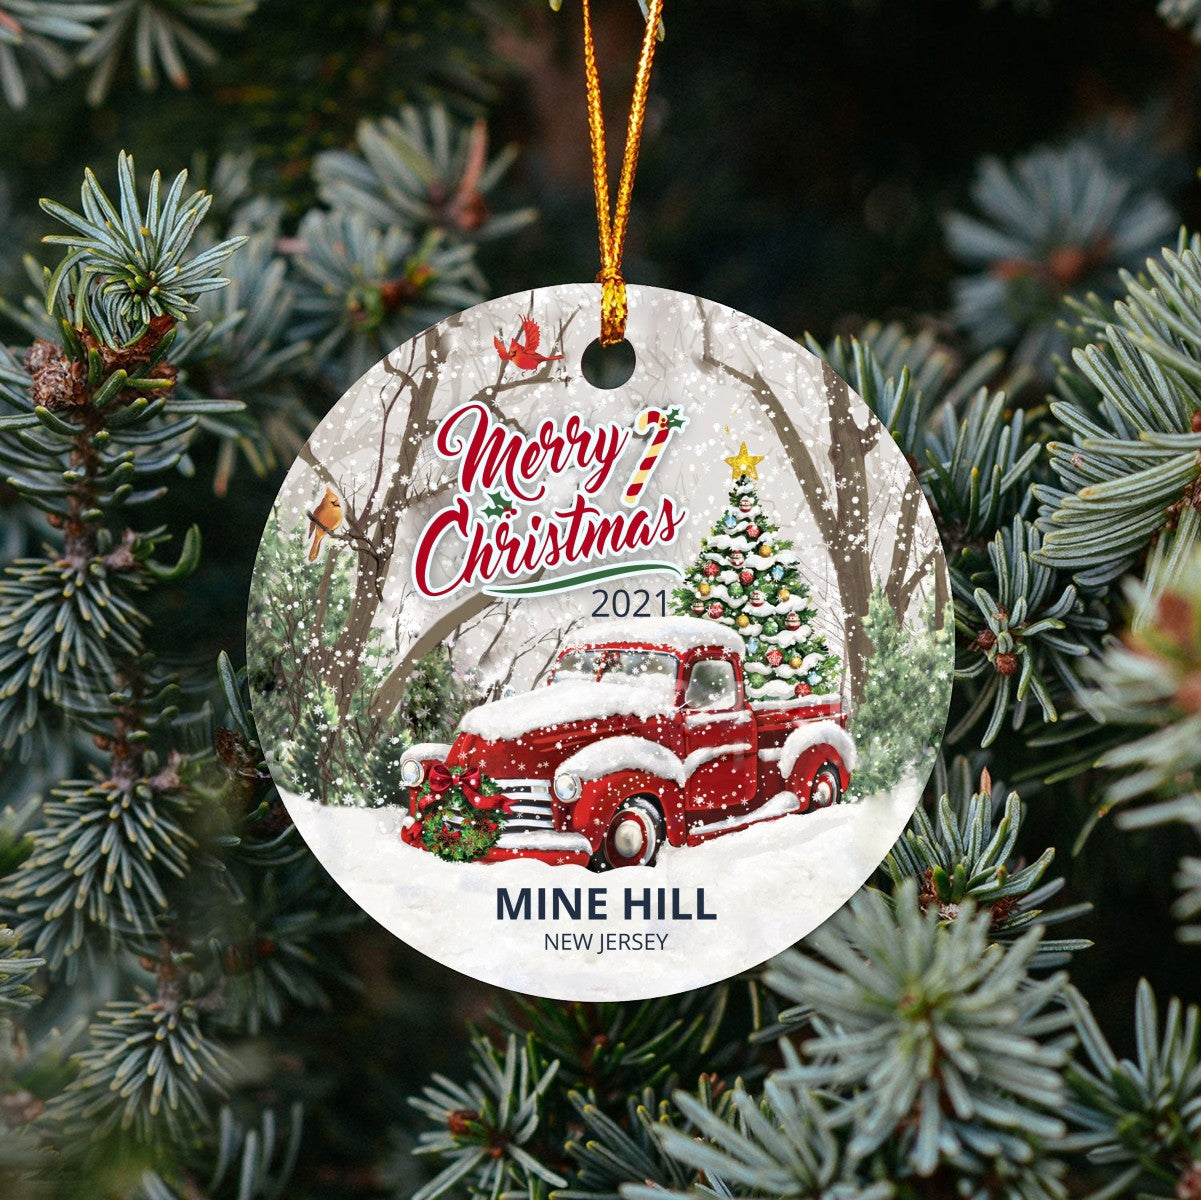 Christmas Tree Ornaments Mine Hill - Ornament With Name City, State Mine Hill New Jersey NJ Ornament - Red Truck Xmas Ornaments 3'' Plastic Gift For Family, Friend And Housewarming